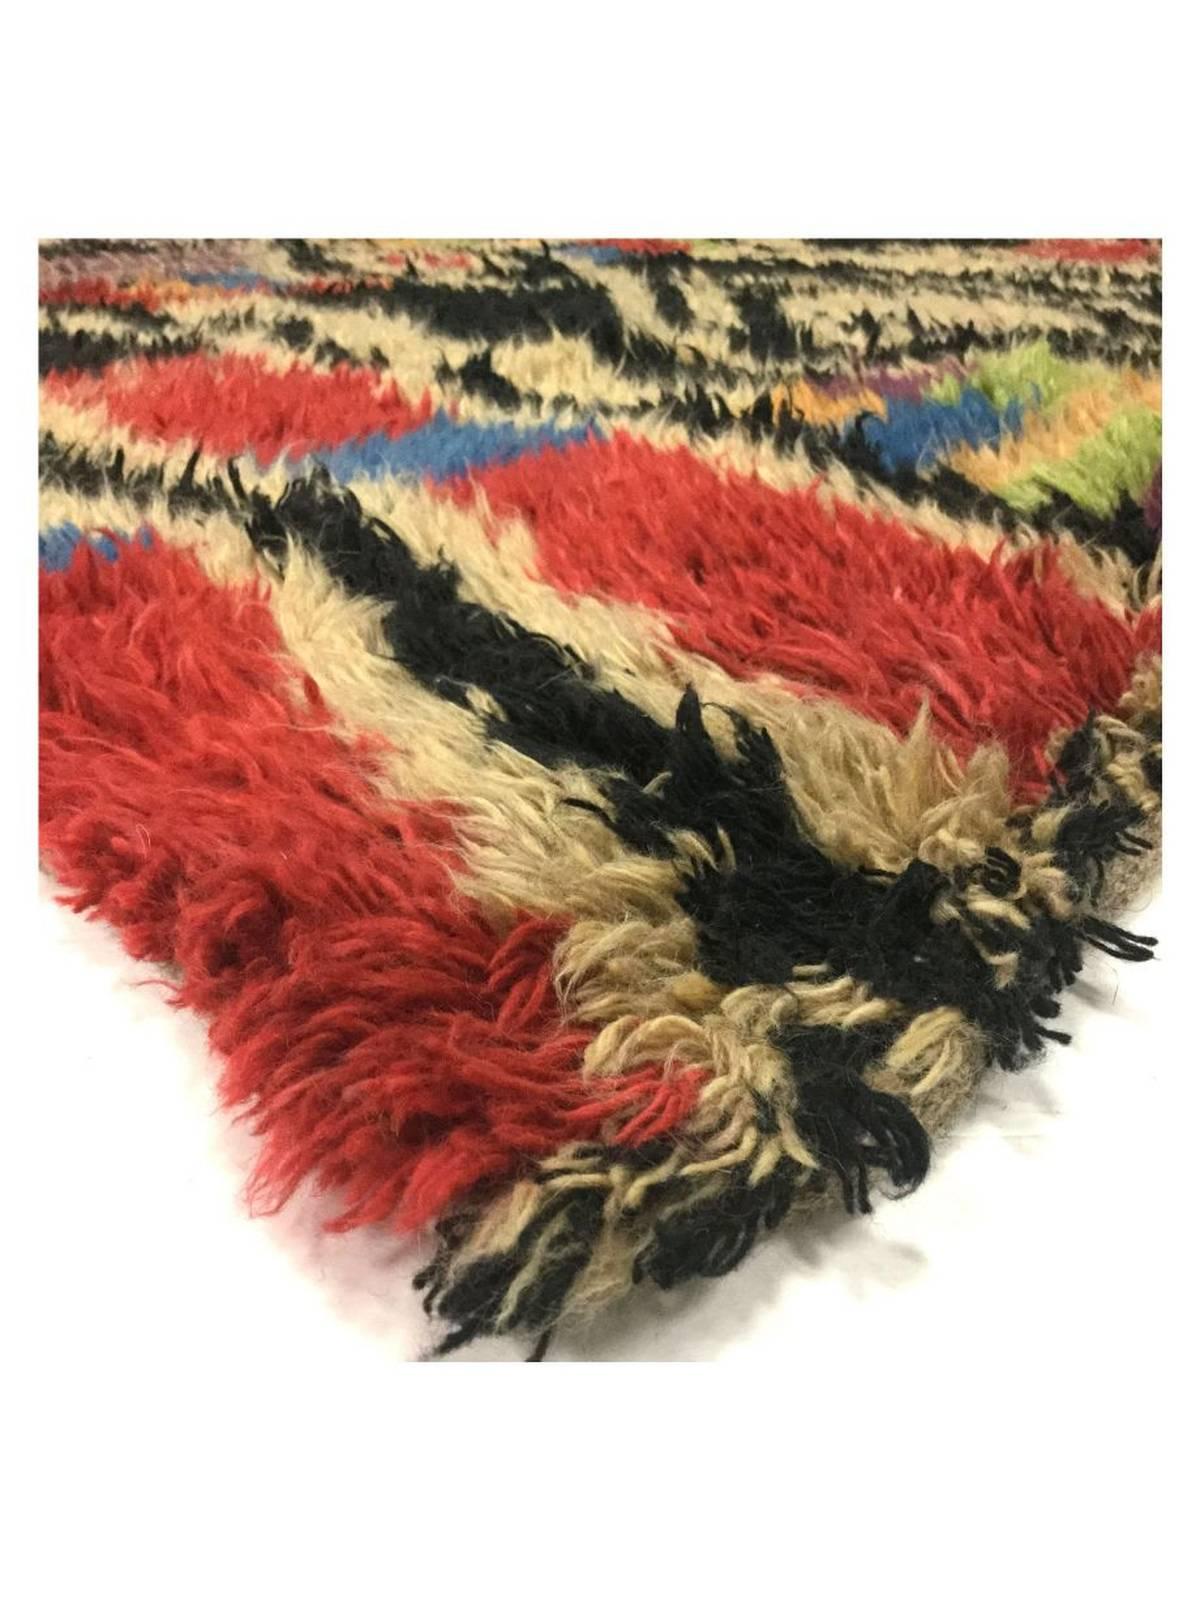 A colourful shag rug in the Scandinavian Rya manner, made in Egypt of wool using Tulu style flat looms.